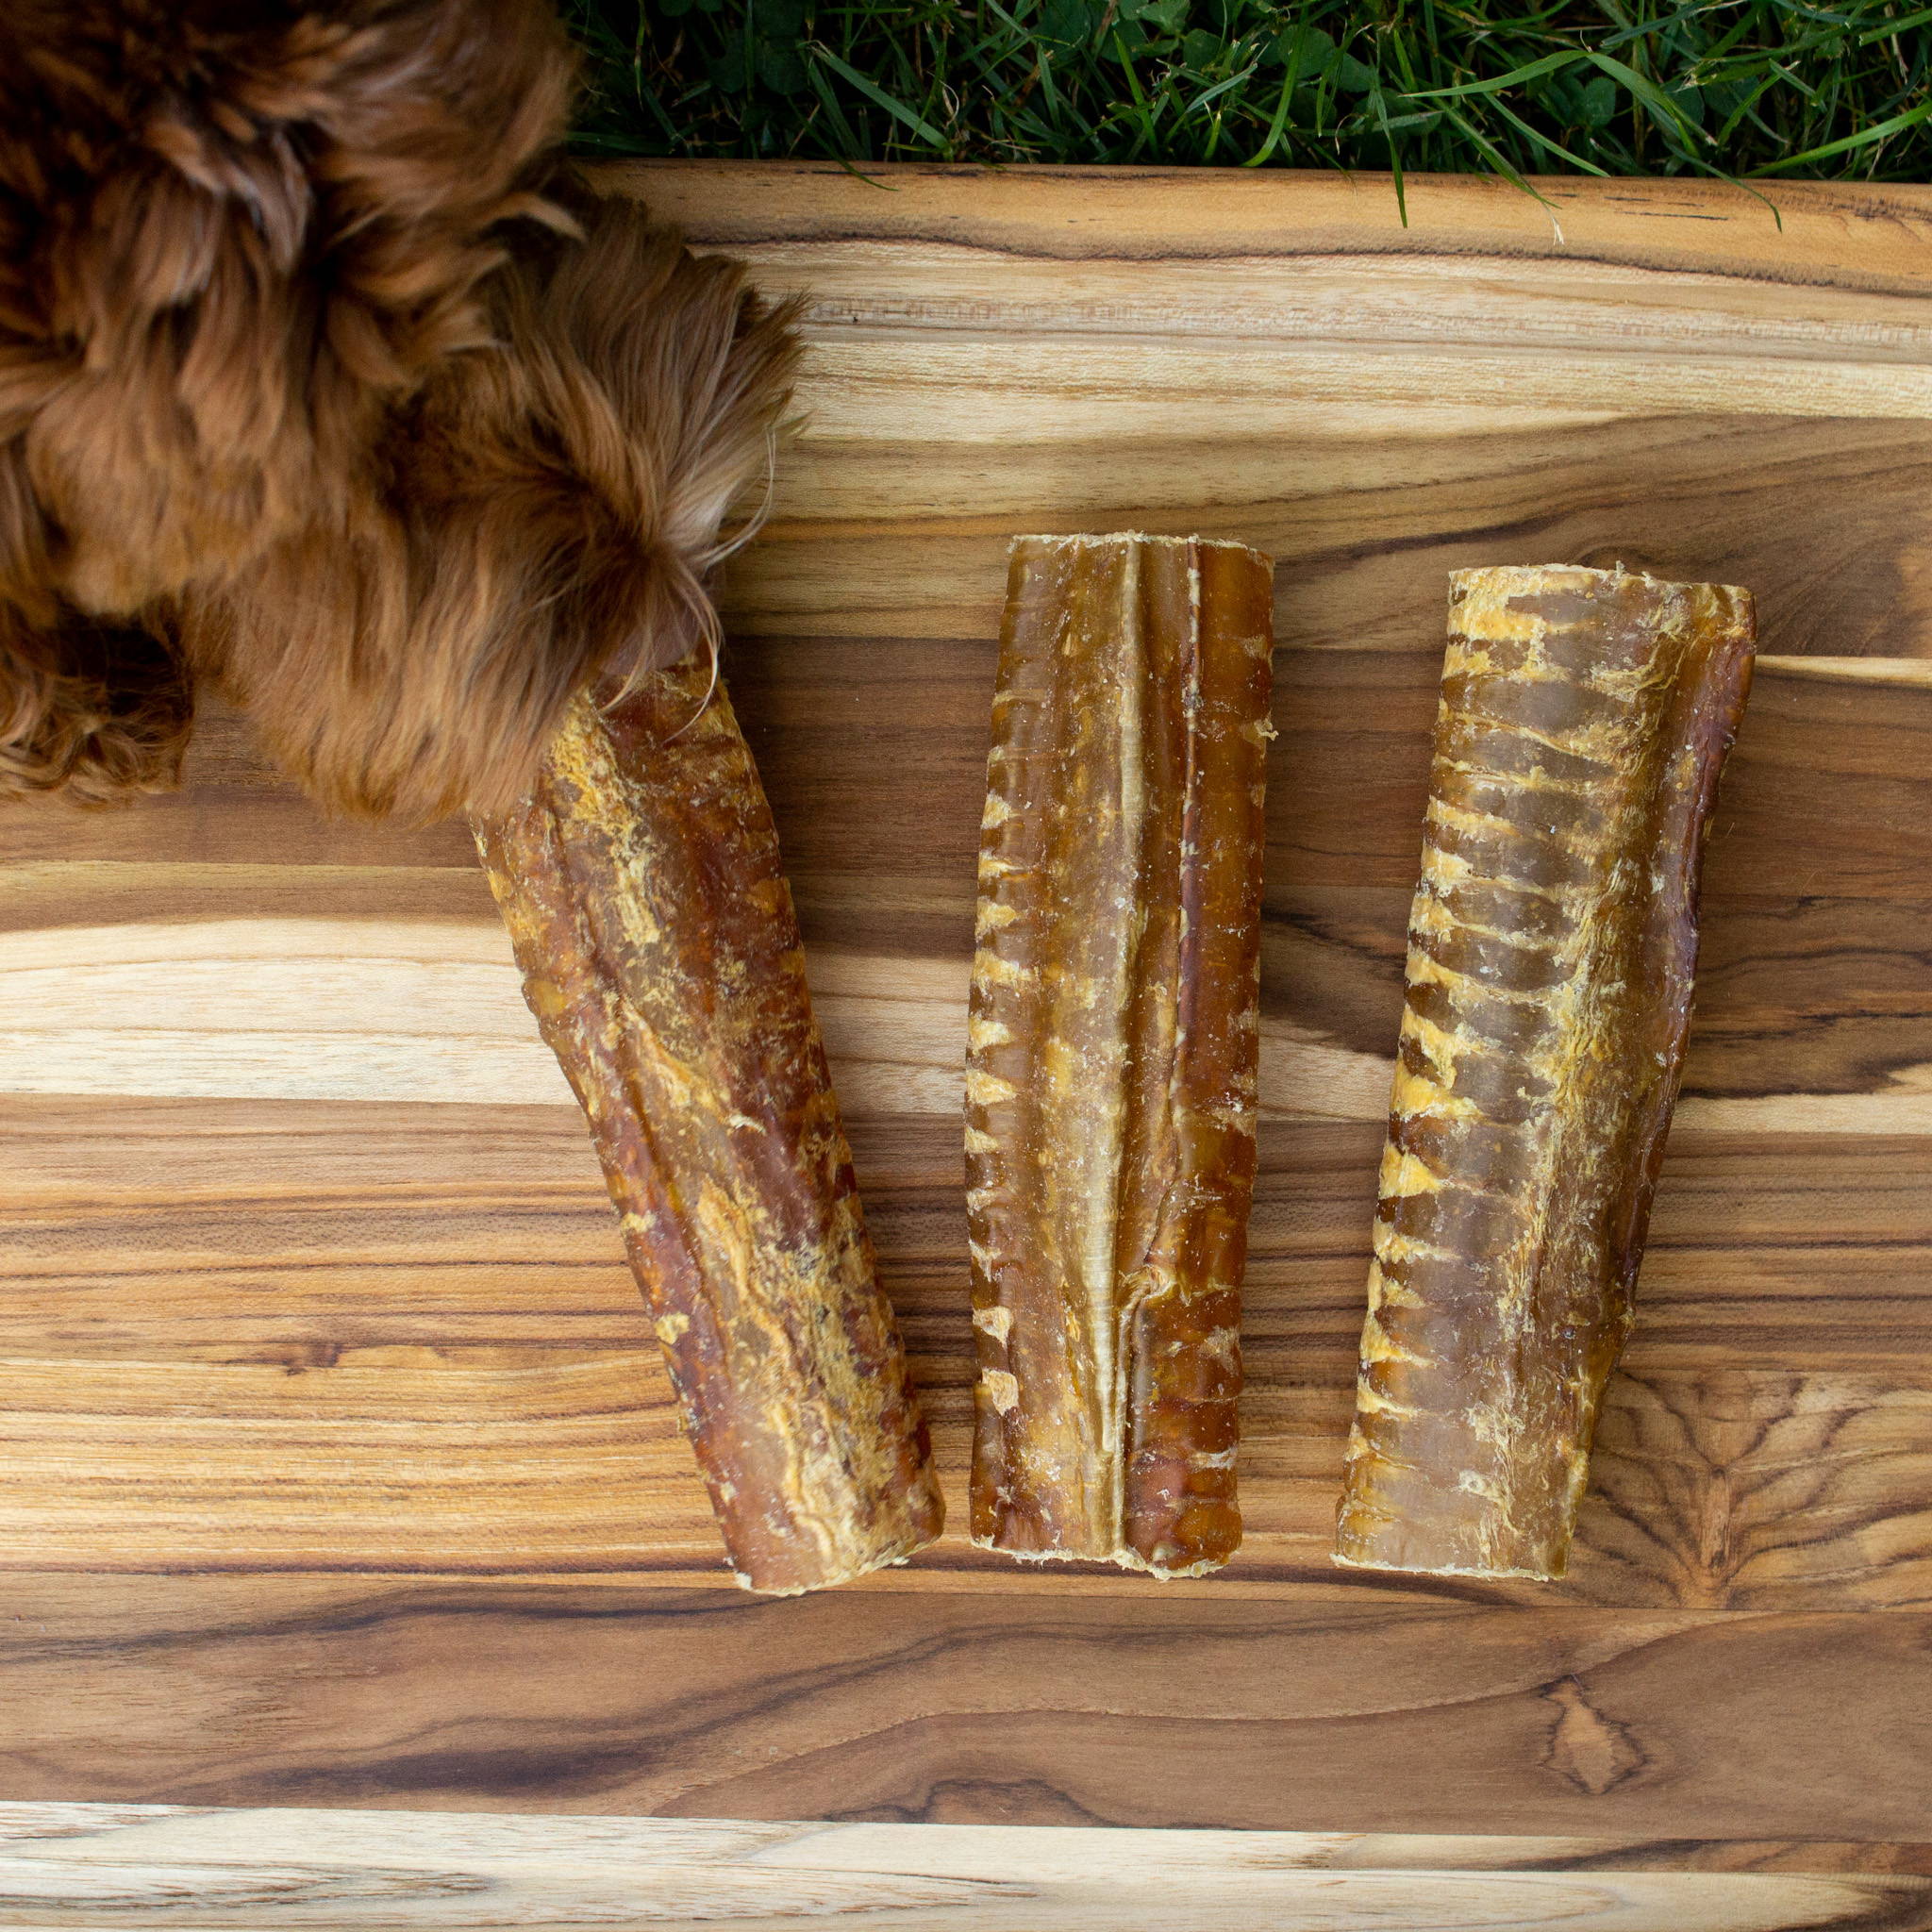 Three beef trachea chews on wood surface with dog sniffing in upper left corner.